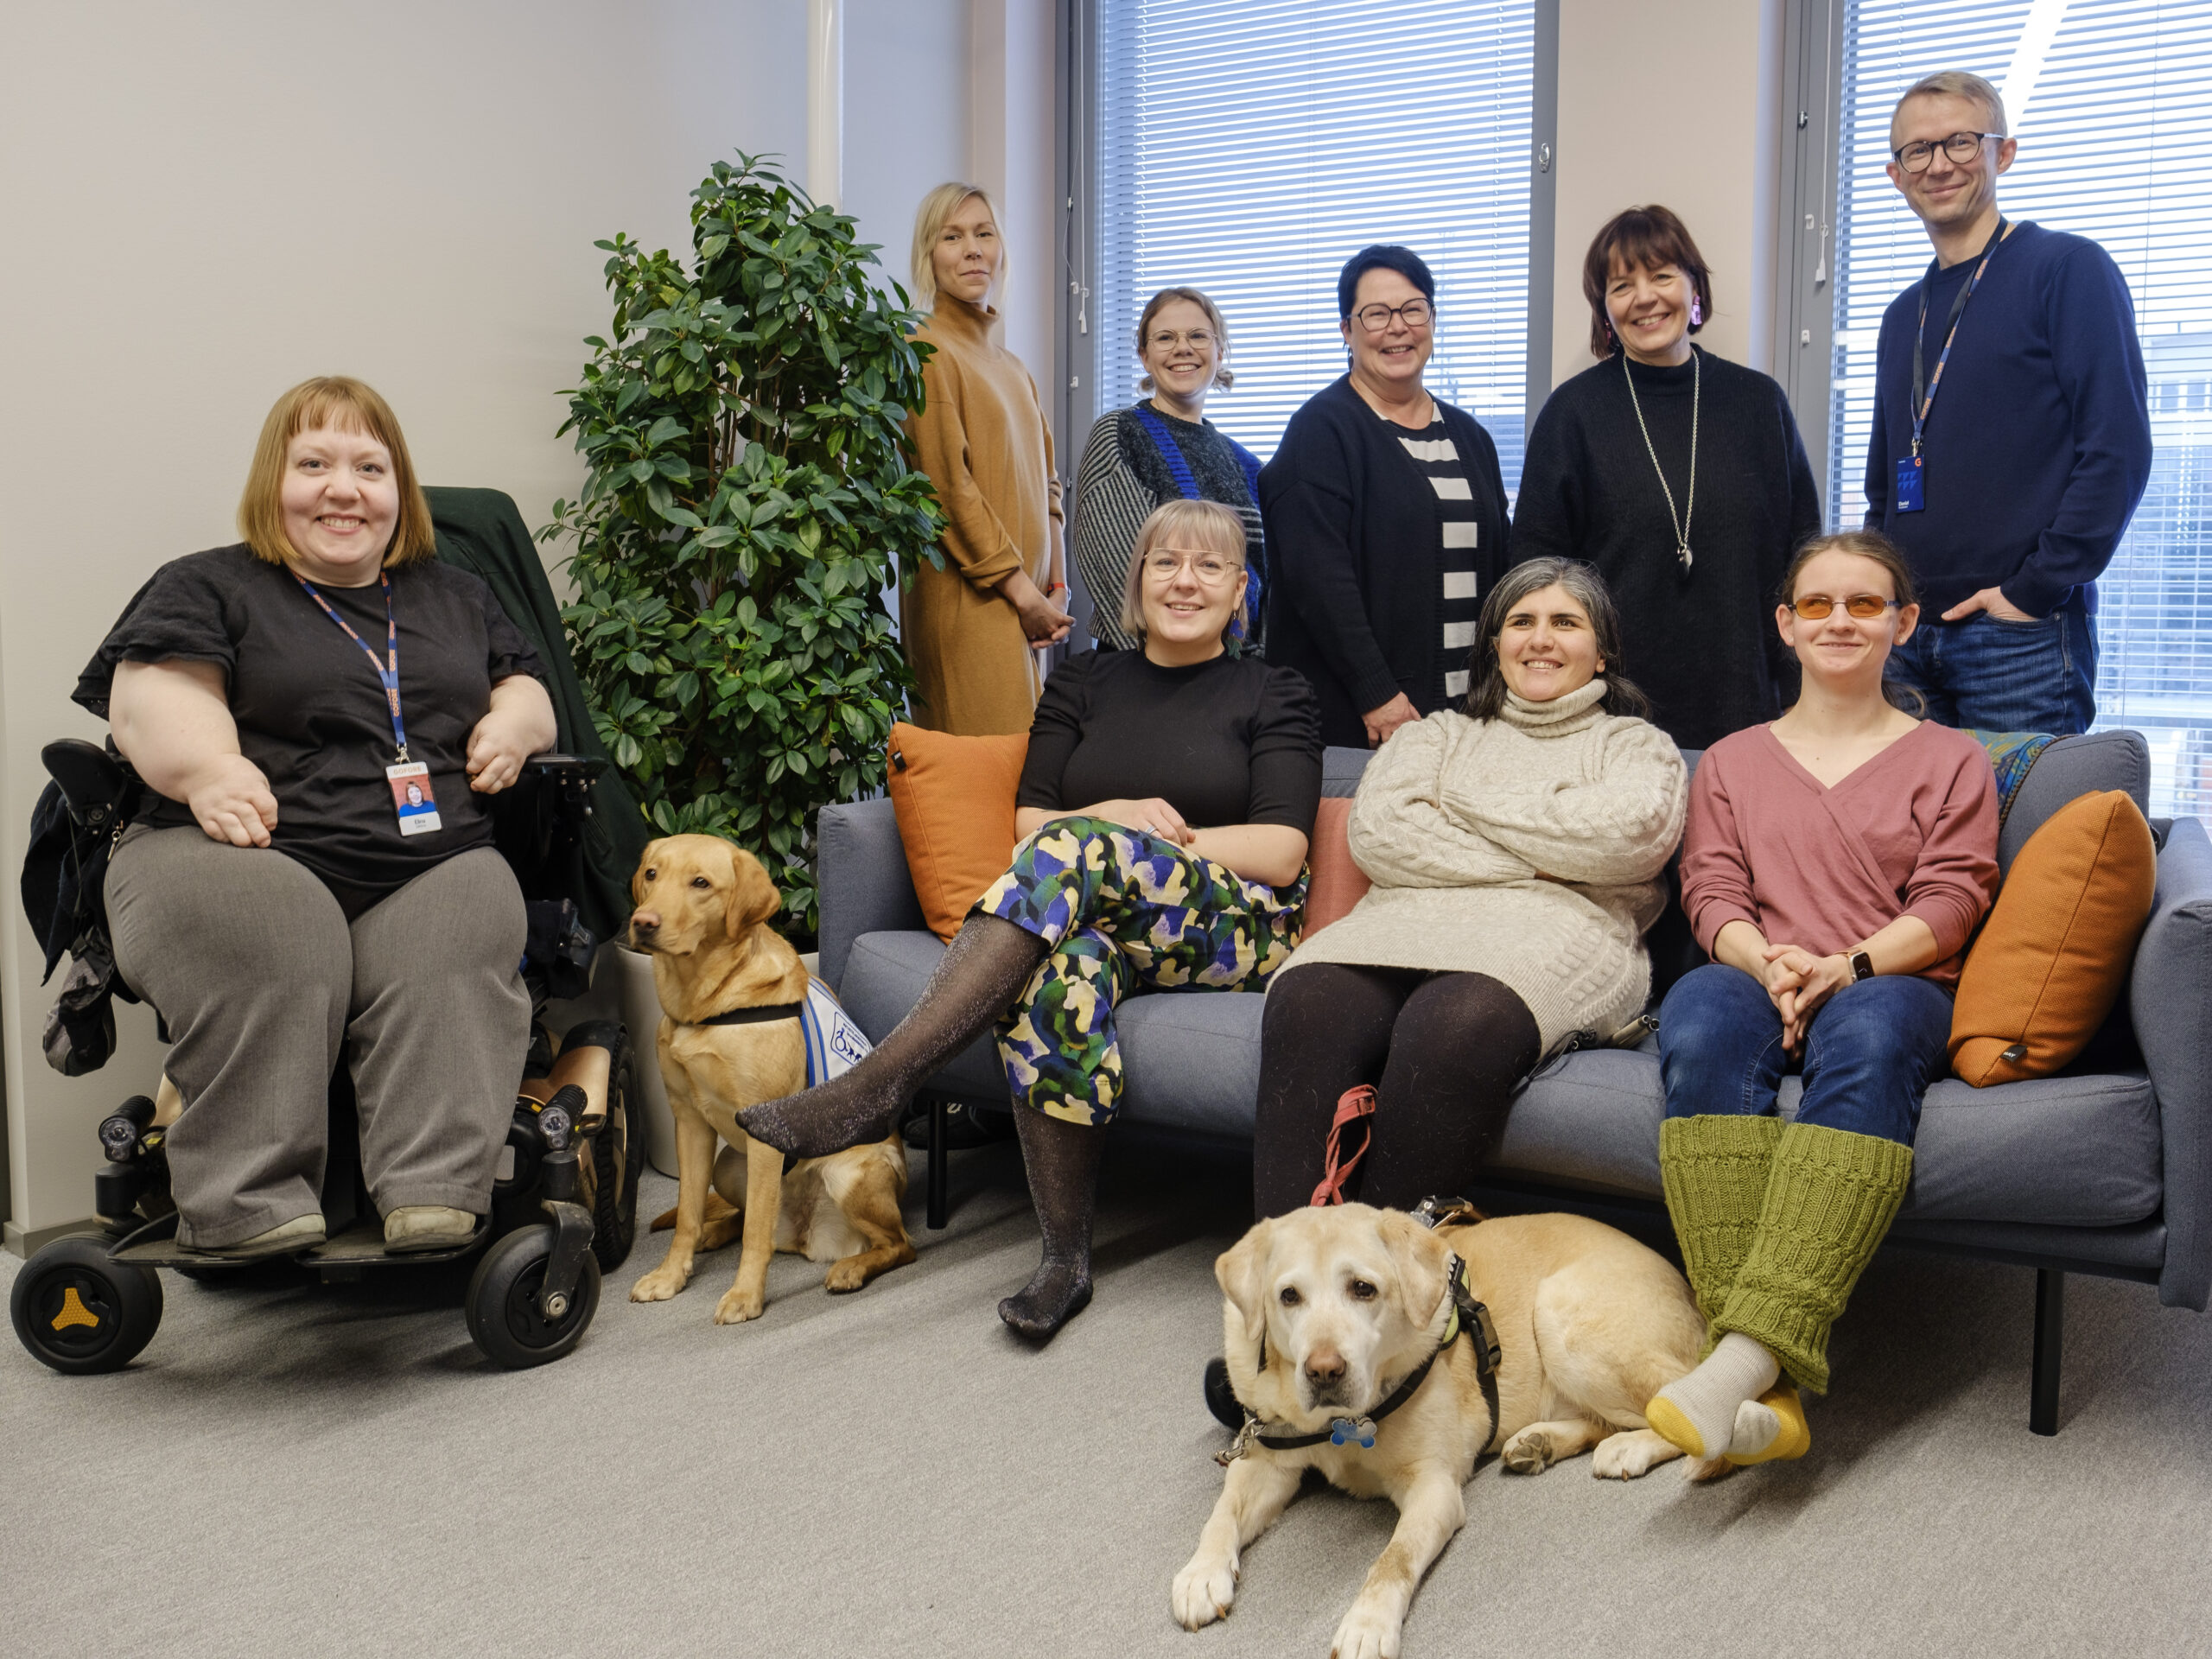 Three people sitting on a sofa. Five people are standing behind them and next to them is one person in a wheelchair. There are two guide dogs in front of the crew.